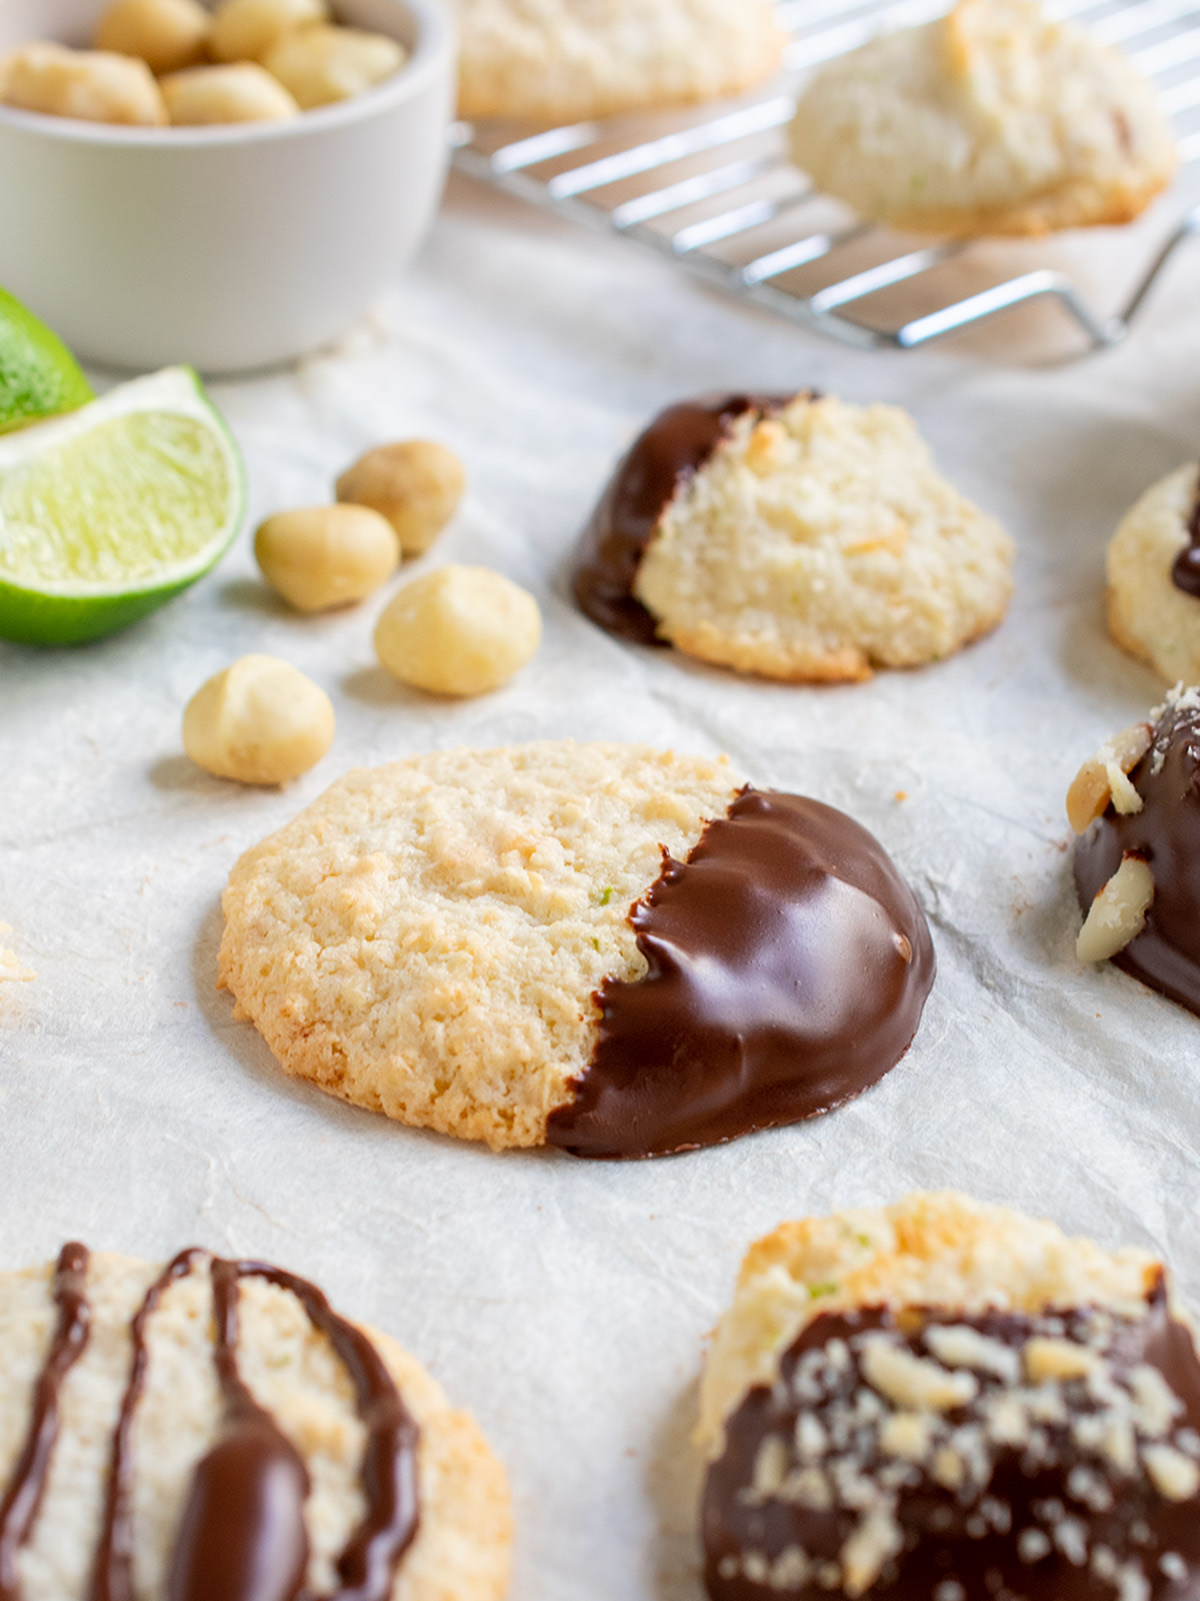 Angled view of a chocolate dipped macaroon with limes quarters and macadamia nuts and other cookies all around it.